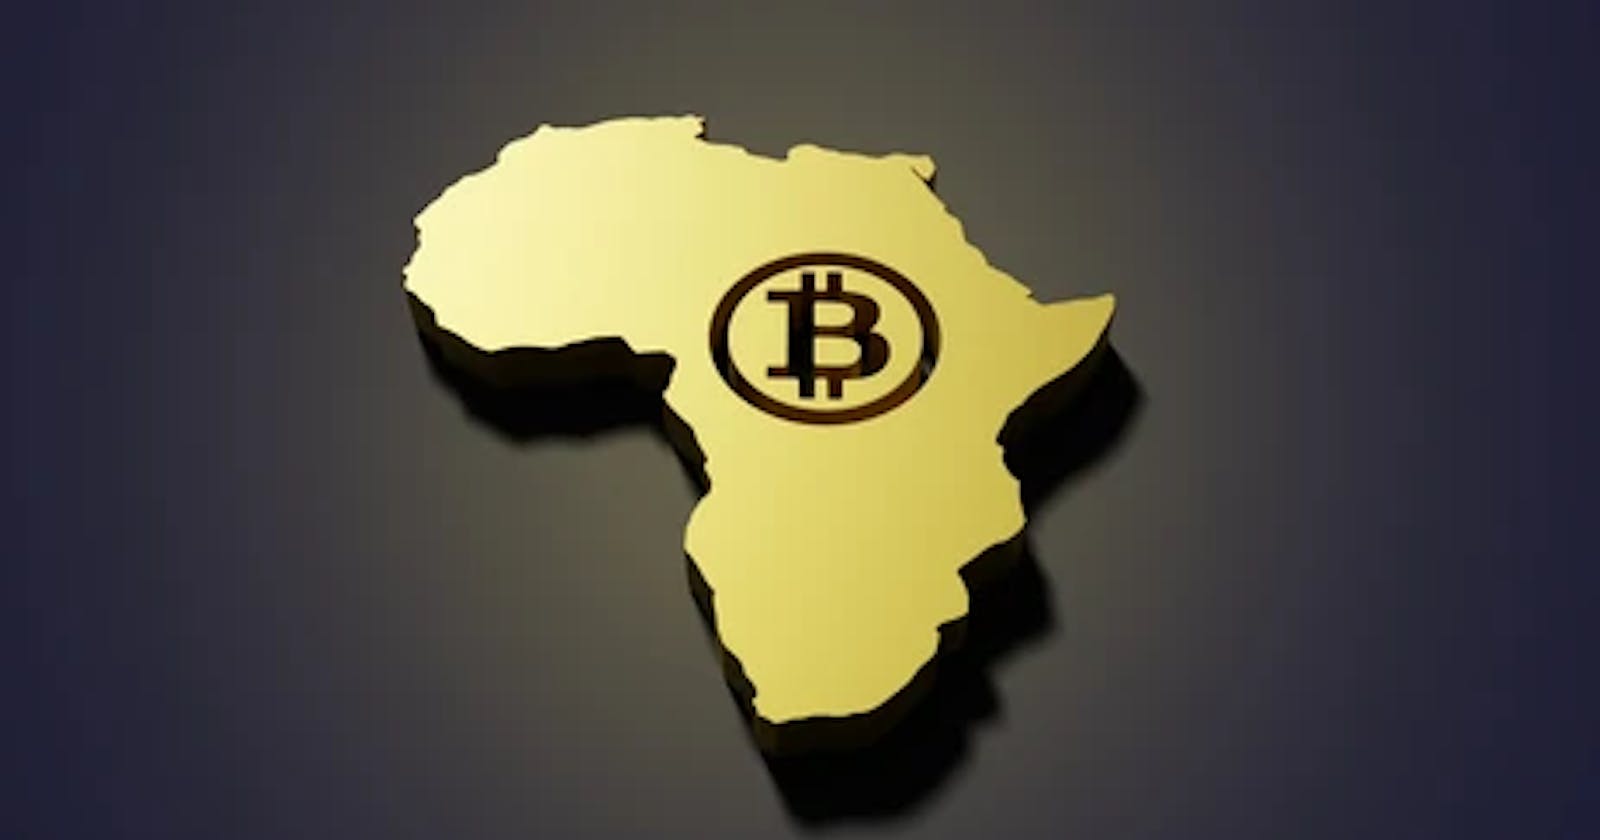 Bitcoin's contribution to Africa